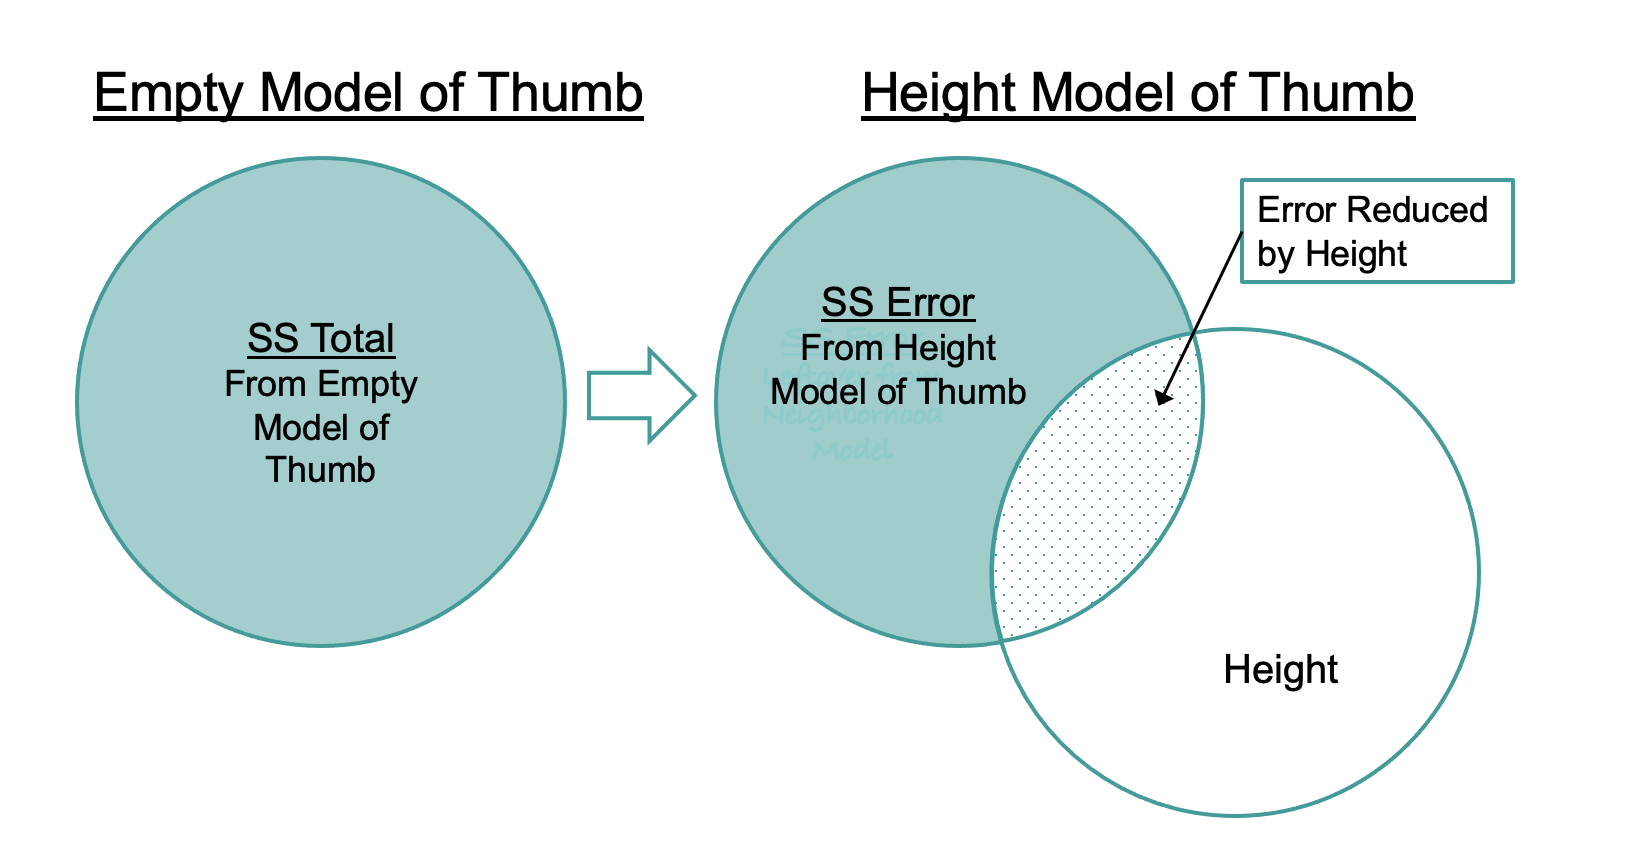 Diagram showing the partitioning of Sum of Squares. On the left, a single circle represents SS Total from the Empty Model of Thumb. On the right, that same circle (representing Thumb) now intersects with another circle (representing Height). The part of Thumb that does not overlap with Height is labeled SS Error from the Height Model of Thumb, and the other circle is labeled as Height. The intersection where the two circles overlap is labeled as Error Reduced by Height.